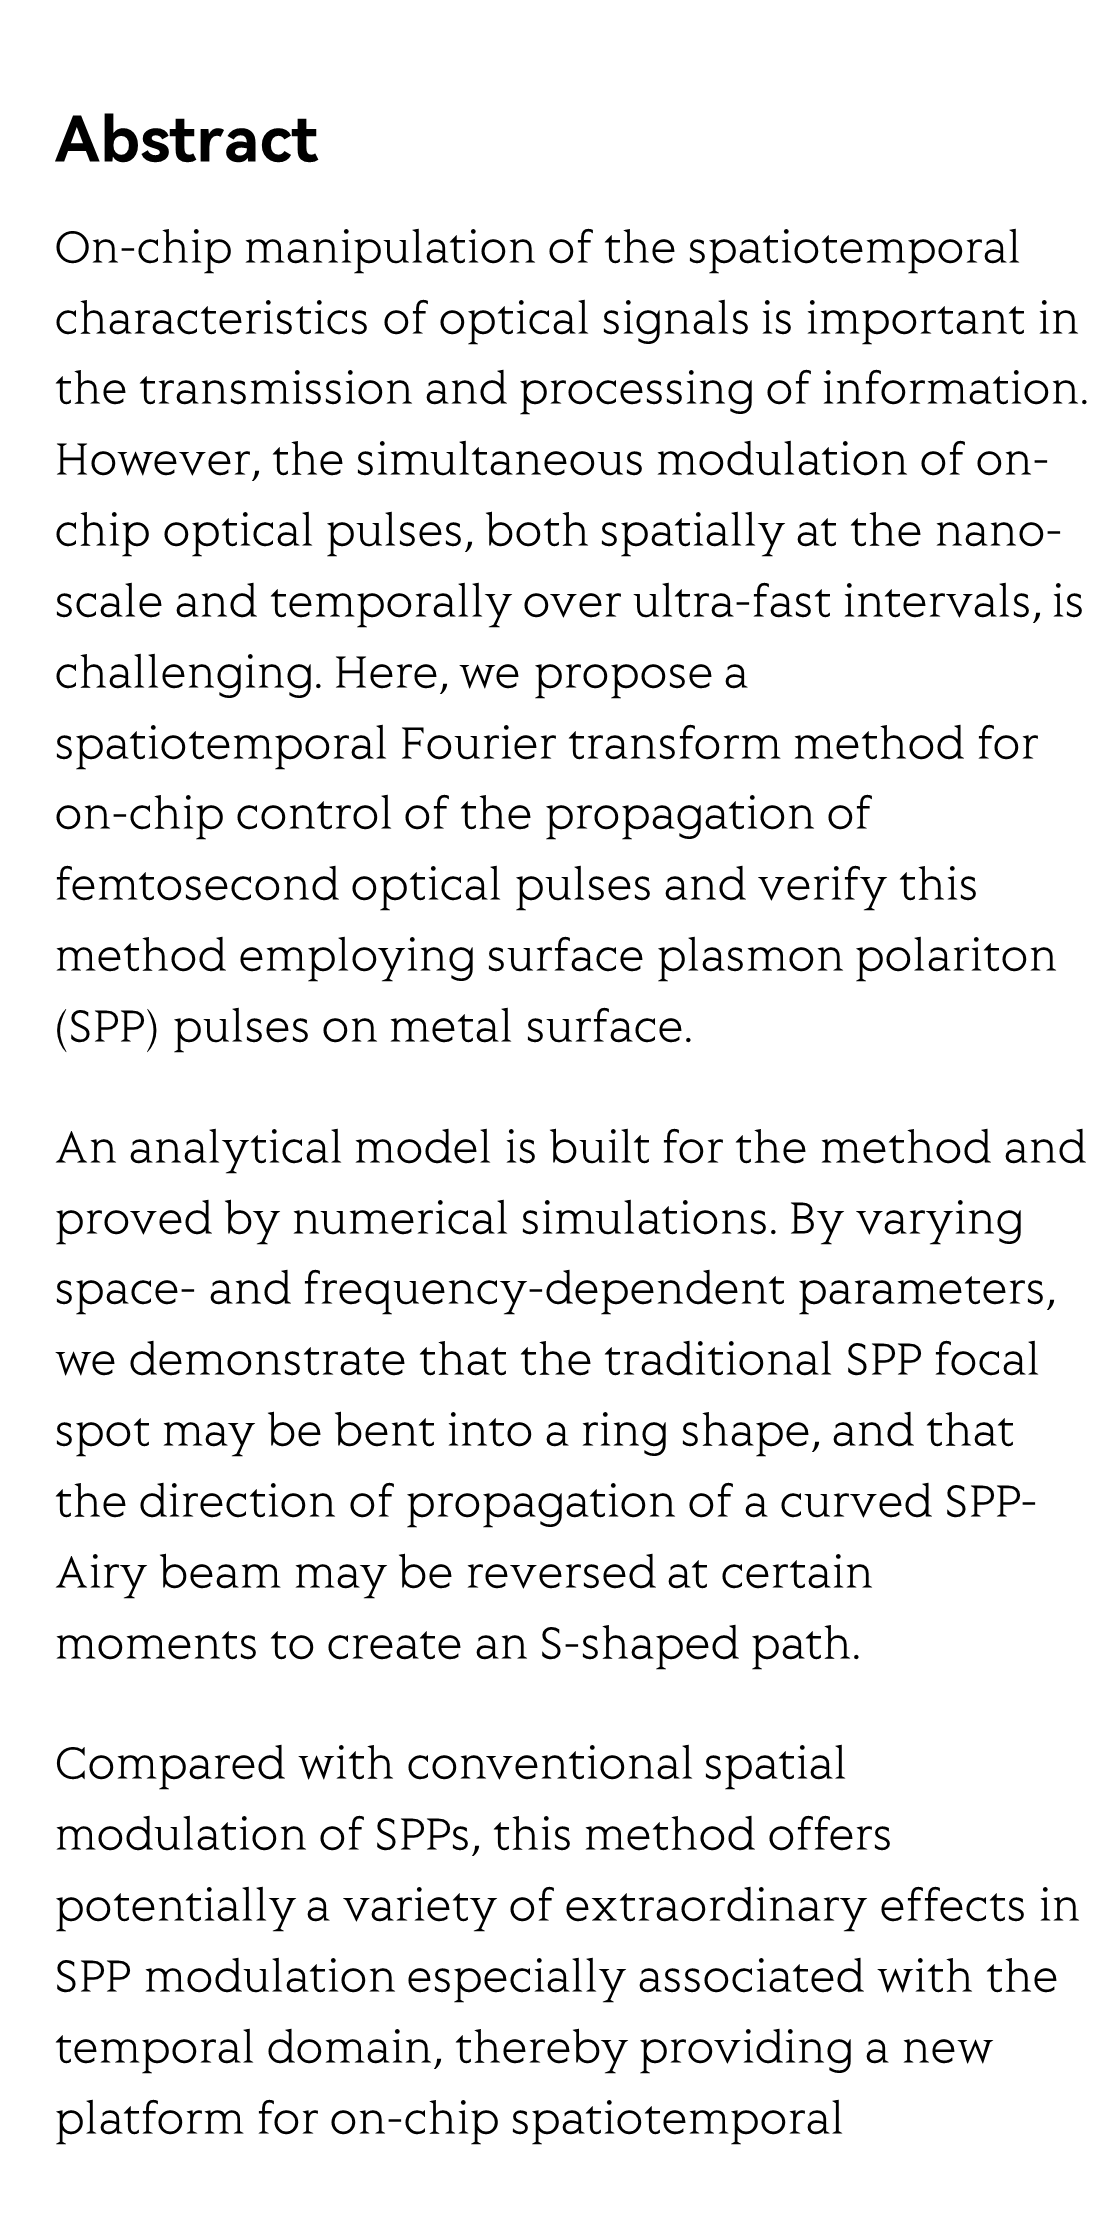 Spatiotemporal Fourier transform with femtosecond pulses for on-chip devices_2